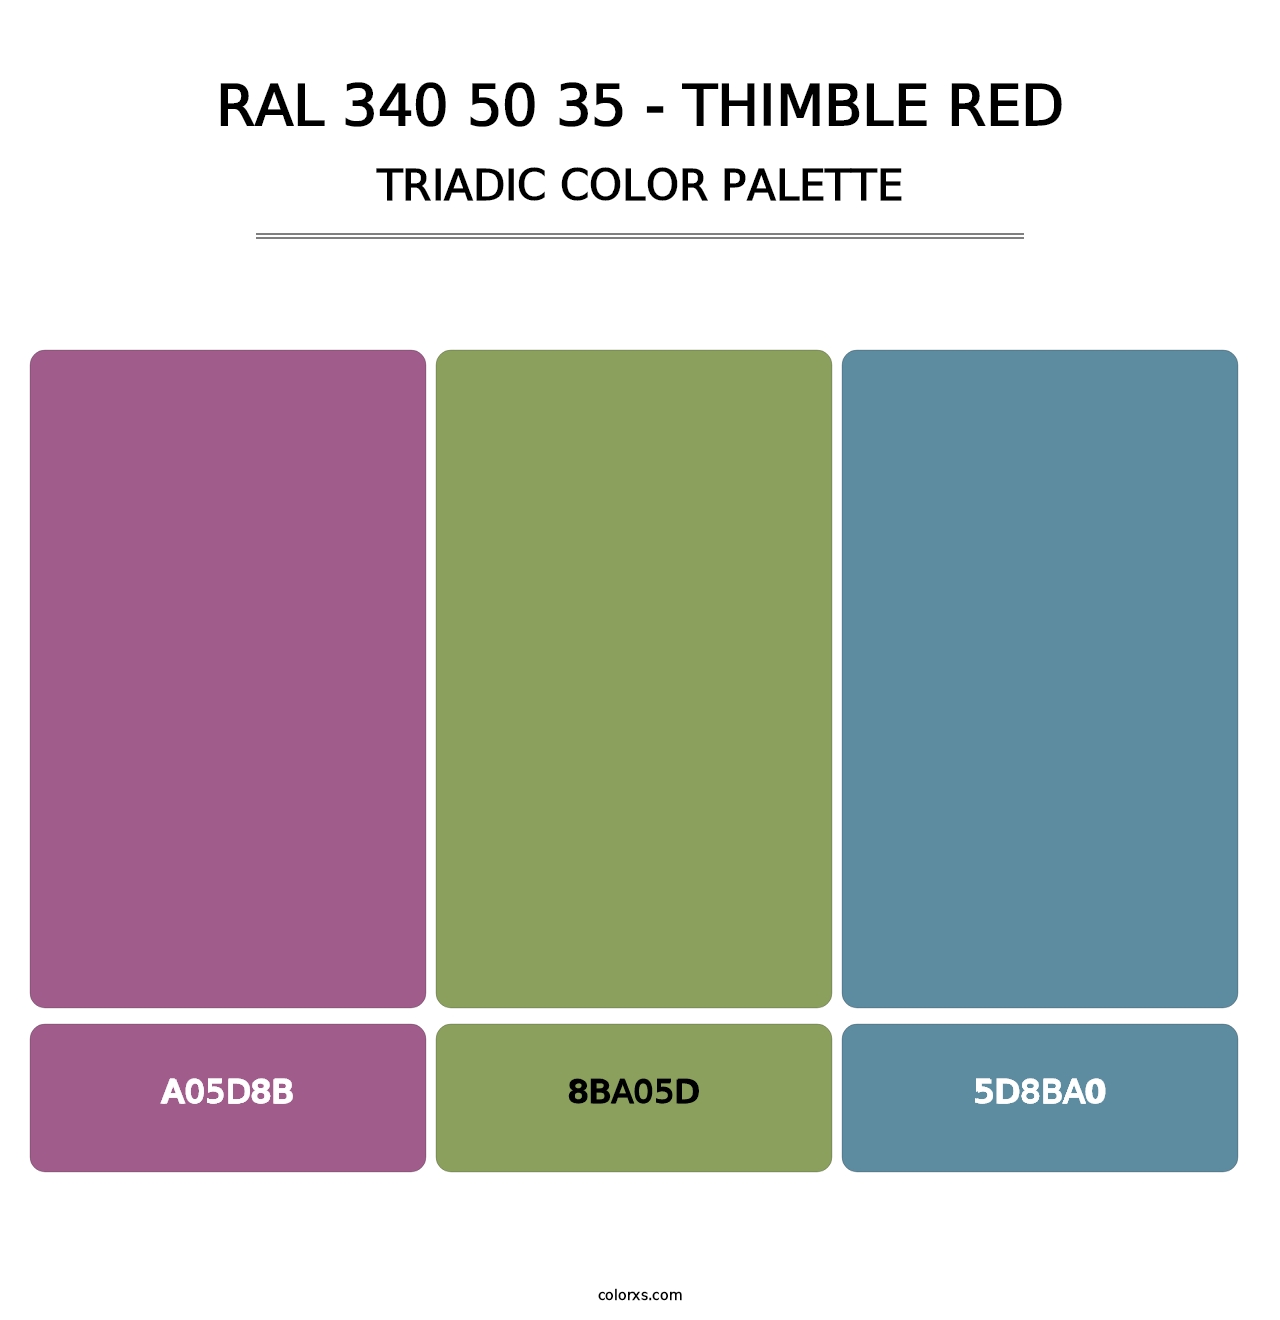 RAL 340 50 35 - Thimble Red - Triadic Color Palette